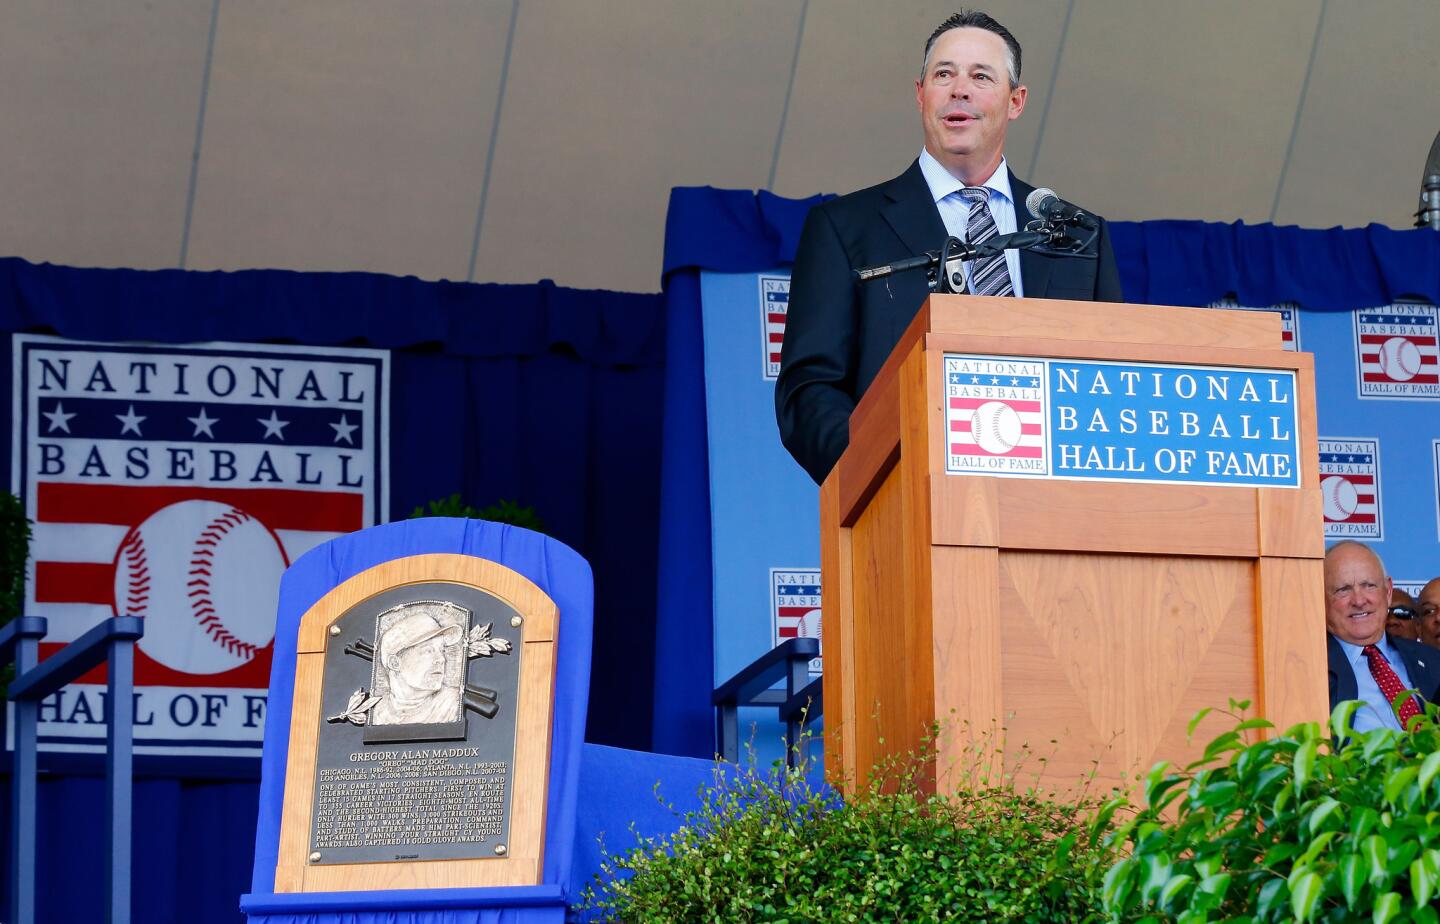 Inductee Greg Maddux gives his speech at Clark Sports Center during the Baseball Hall of Fame induction ceremony in Cooperstown, New York.